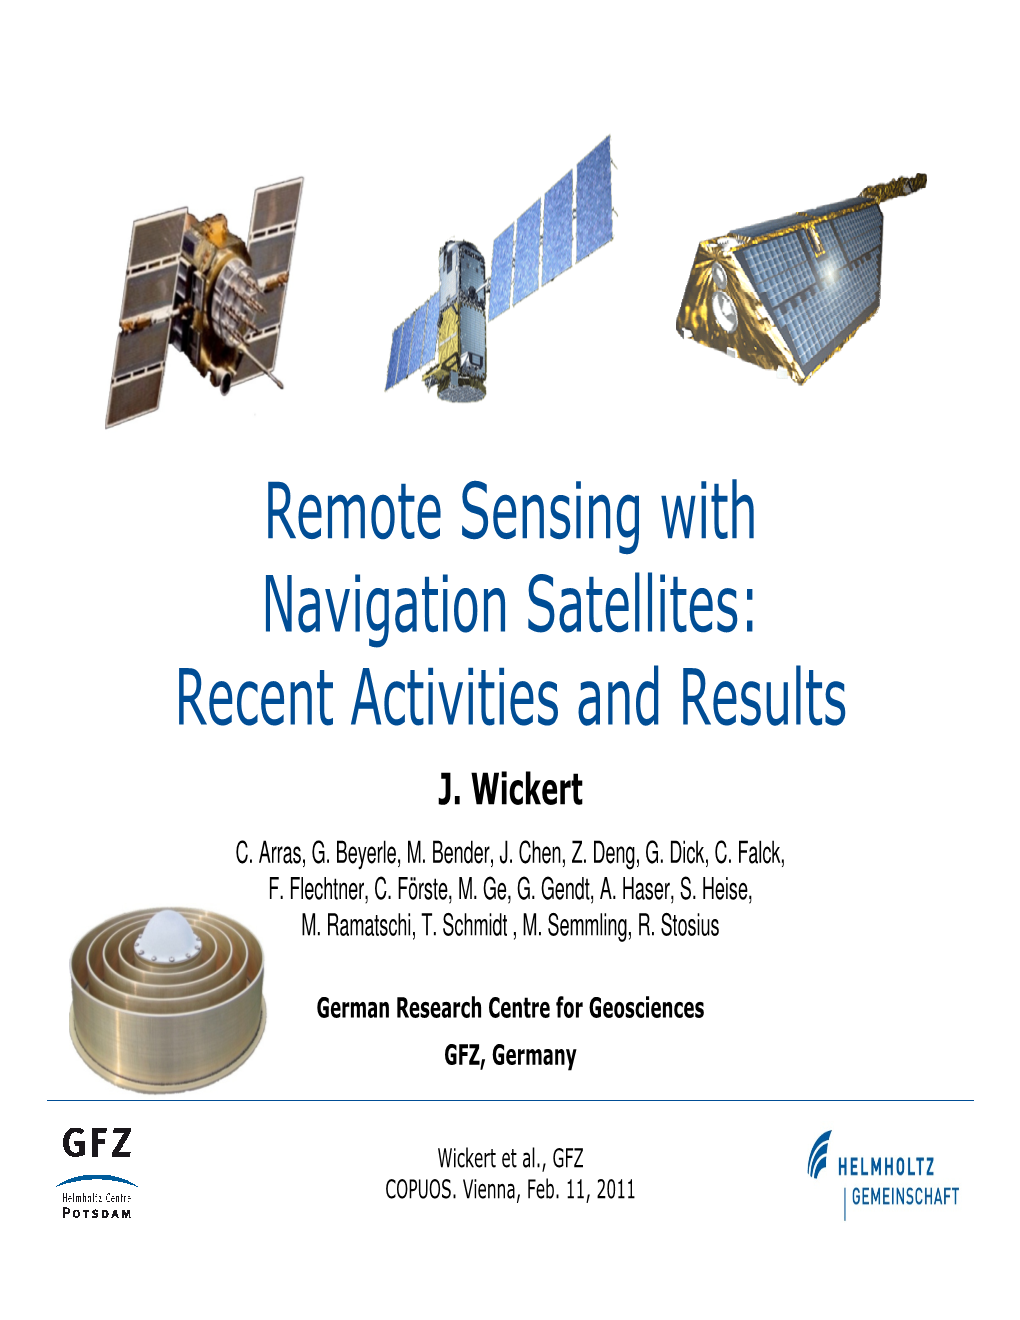 Remote Sensing with Navigation Satellites: Recent Activities and Results J